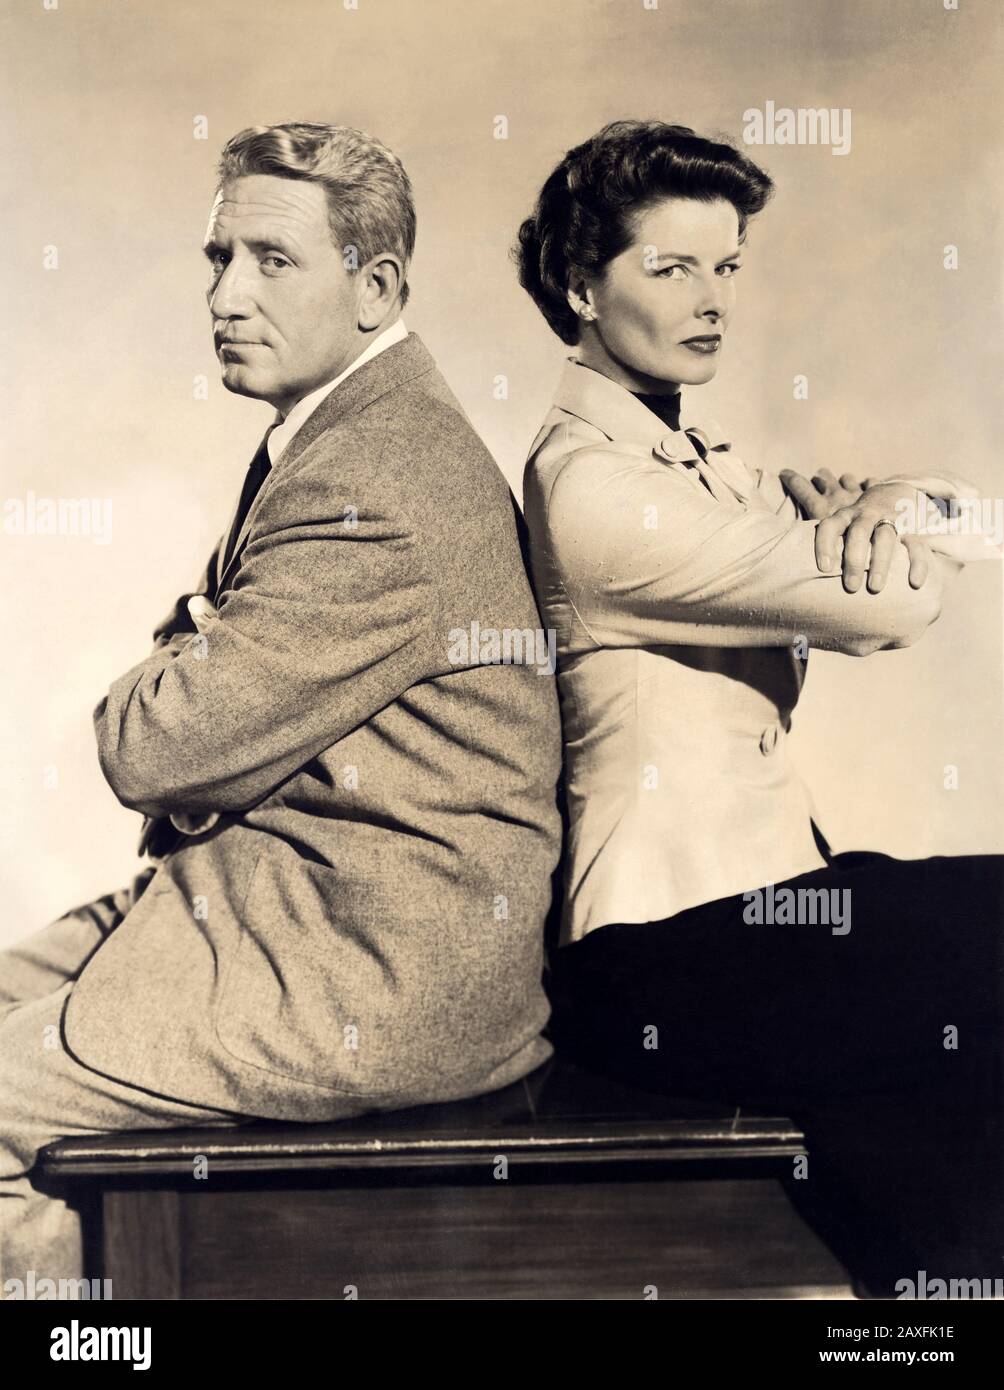 1949 , USA : The movie actress KATHARINE HEPBURN ( 1907 - 2003 )  with SPENCER TRACY in ADAM'S RIB ( La costola di Adamo )  by George Cukor , from a story by Ruth Gordon - COMEDY -  FILM  - DIVA - DIVINA  - lotta - fight - camicia - shirt - coppia - duo - couple - innamorati - amanti - lovers  © Archivio GBB / Stock Photo